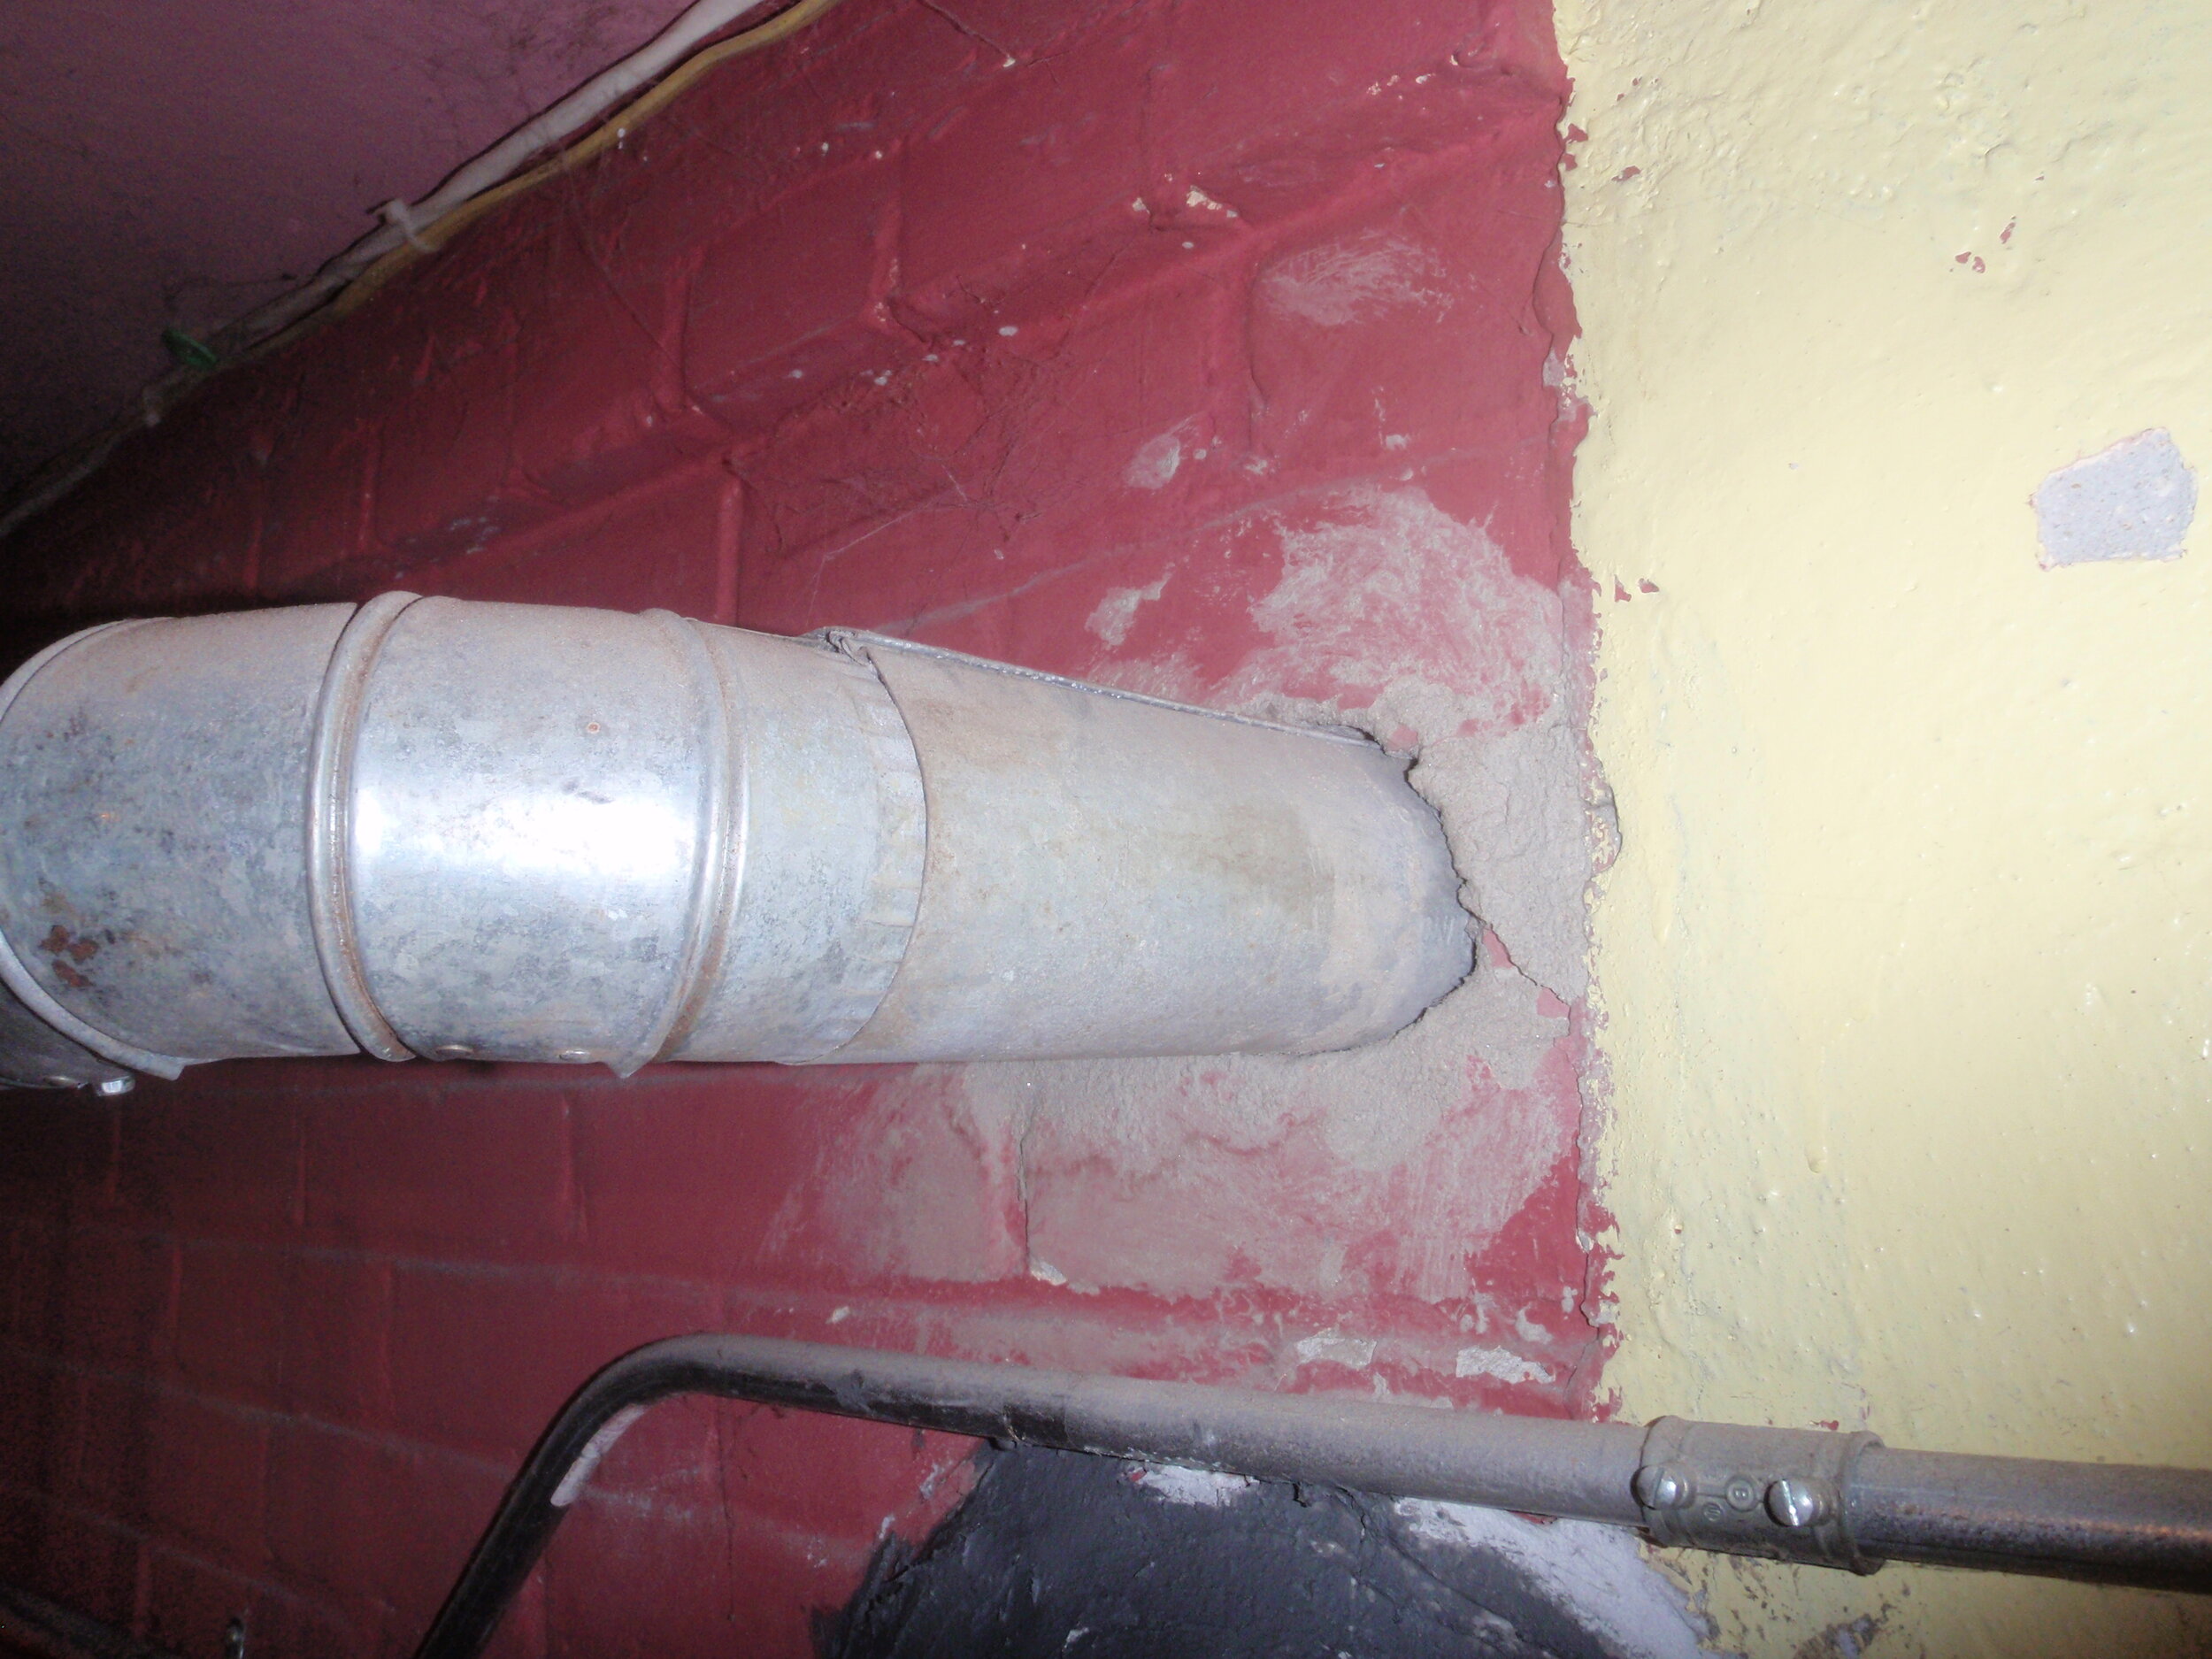 Flue Pipe Improperly Connected to the Chimney without the Required Thimble